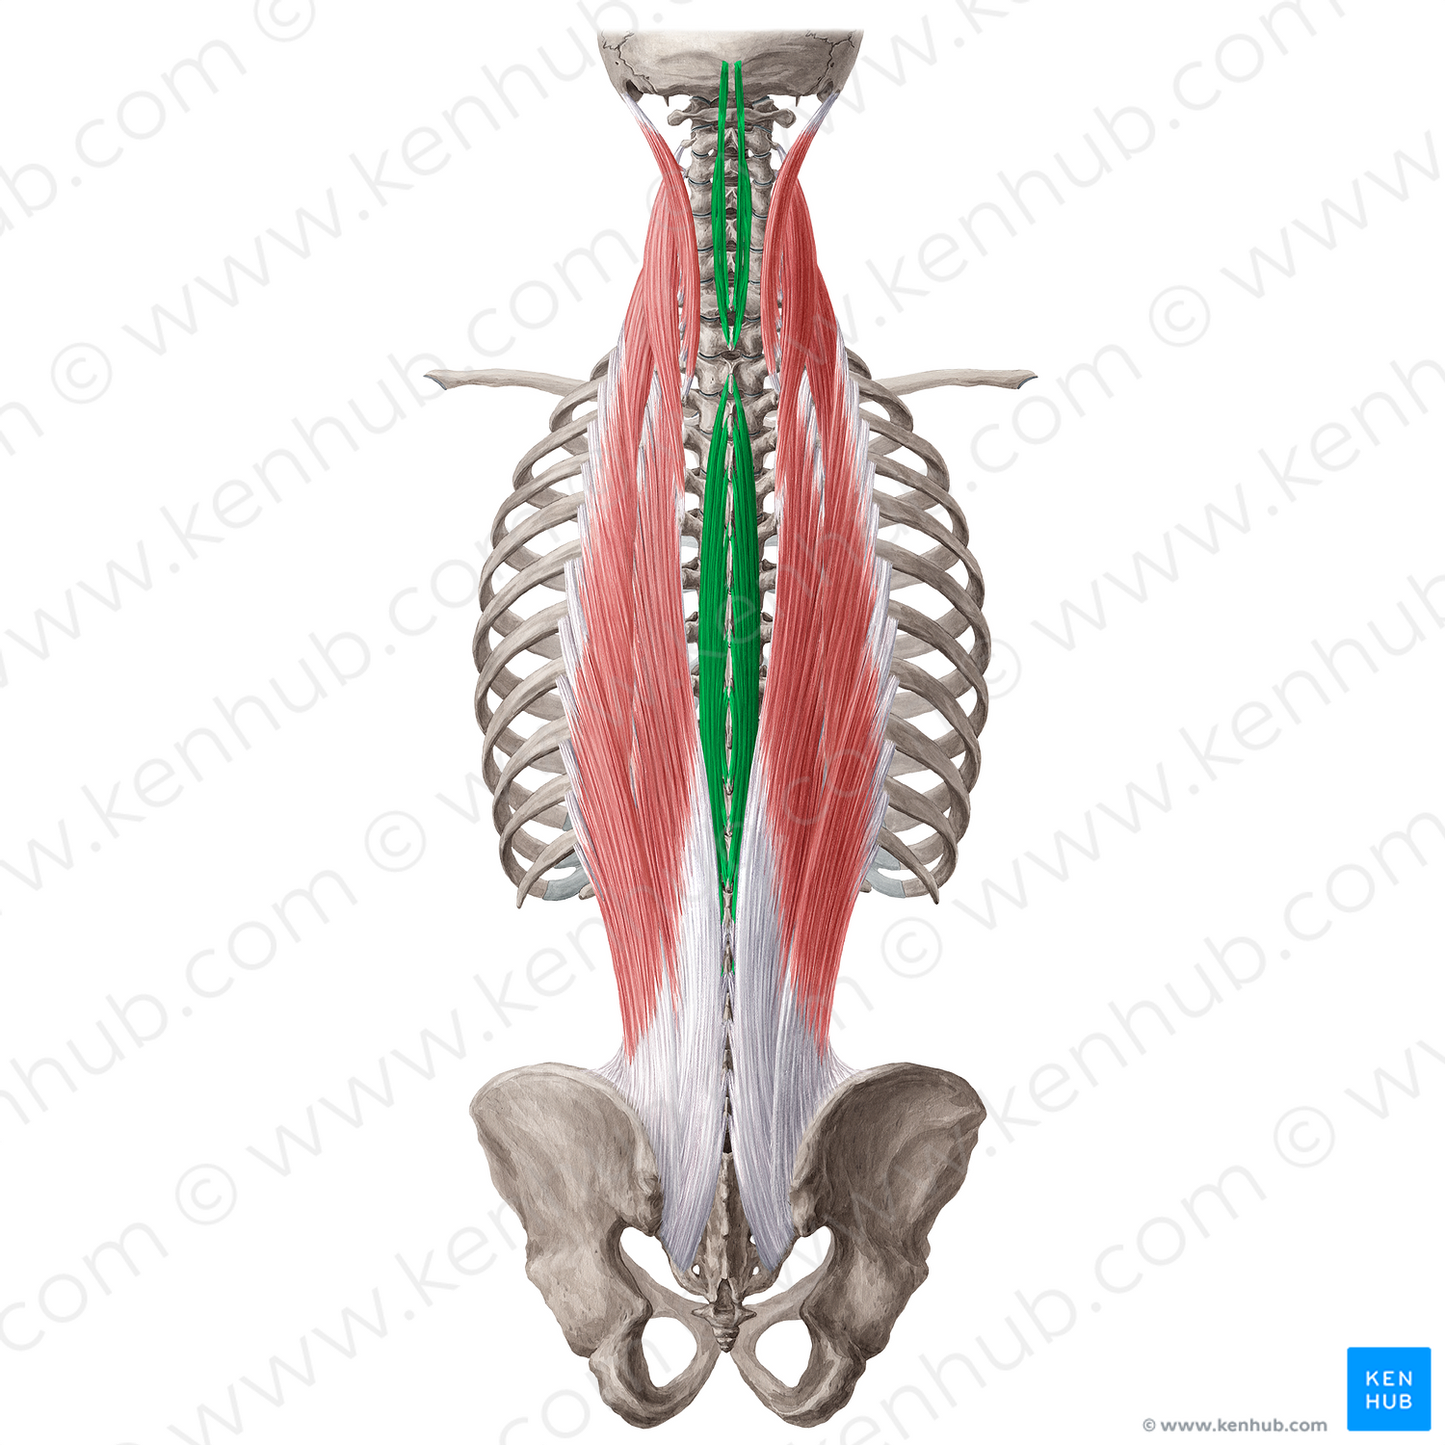 Spinalis muscle (#18999)